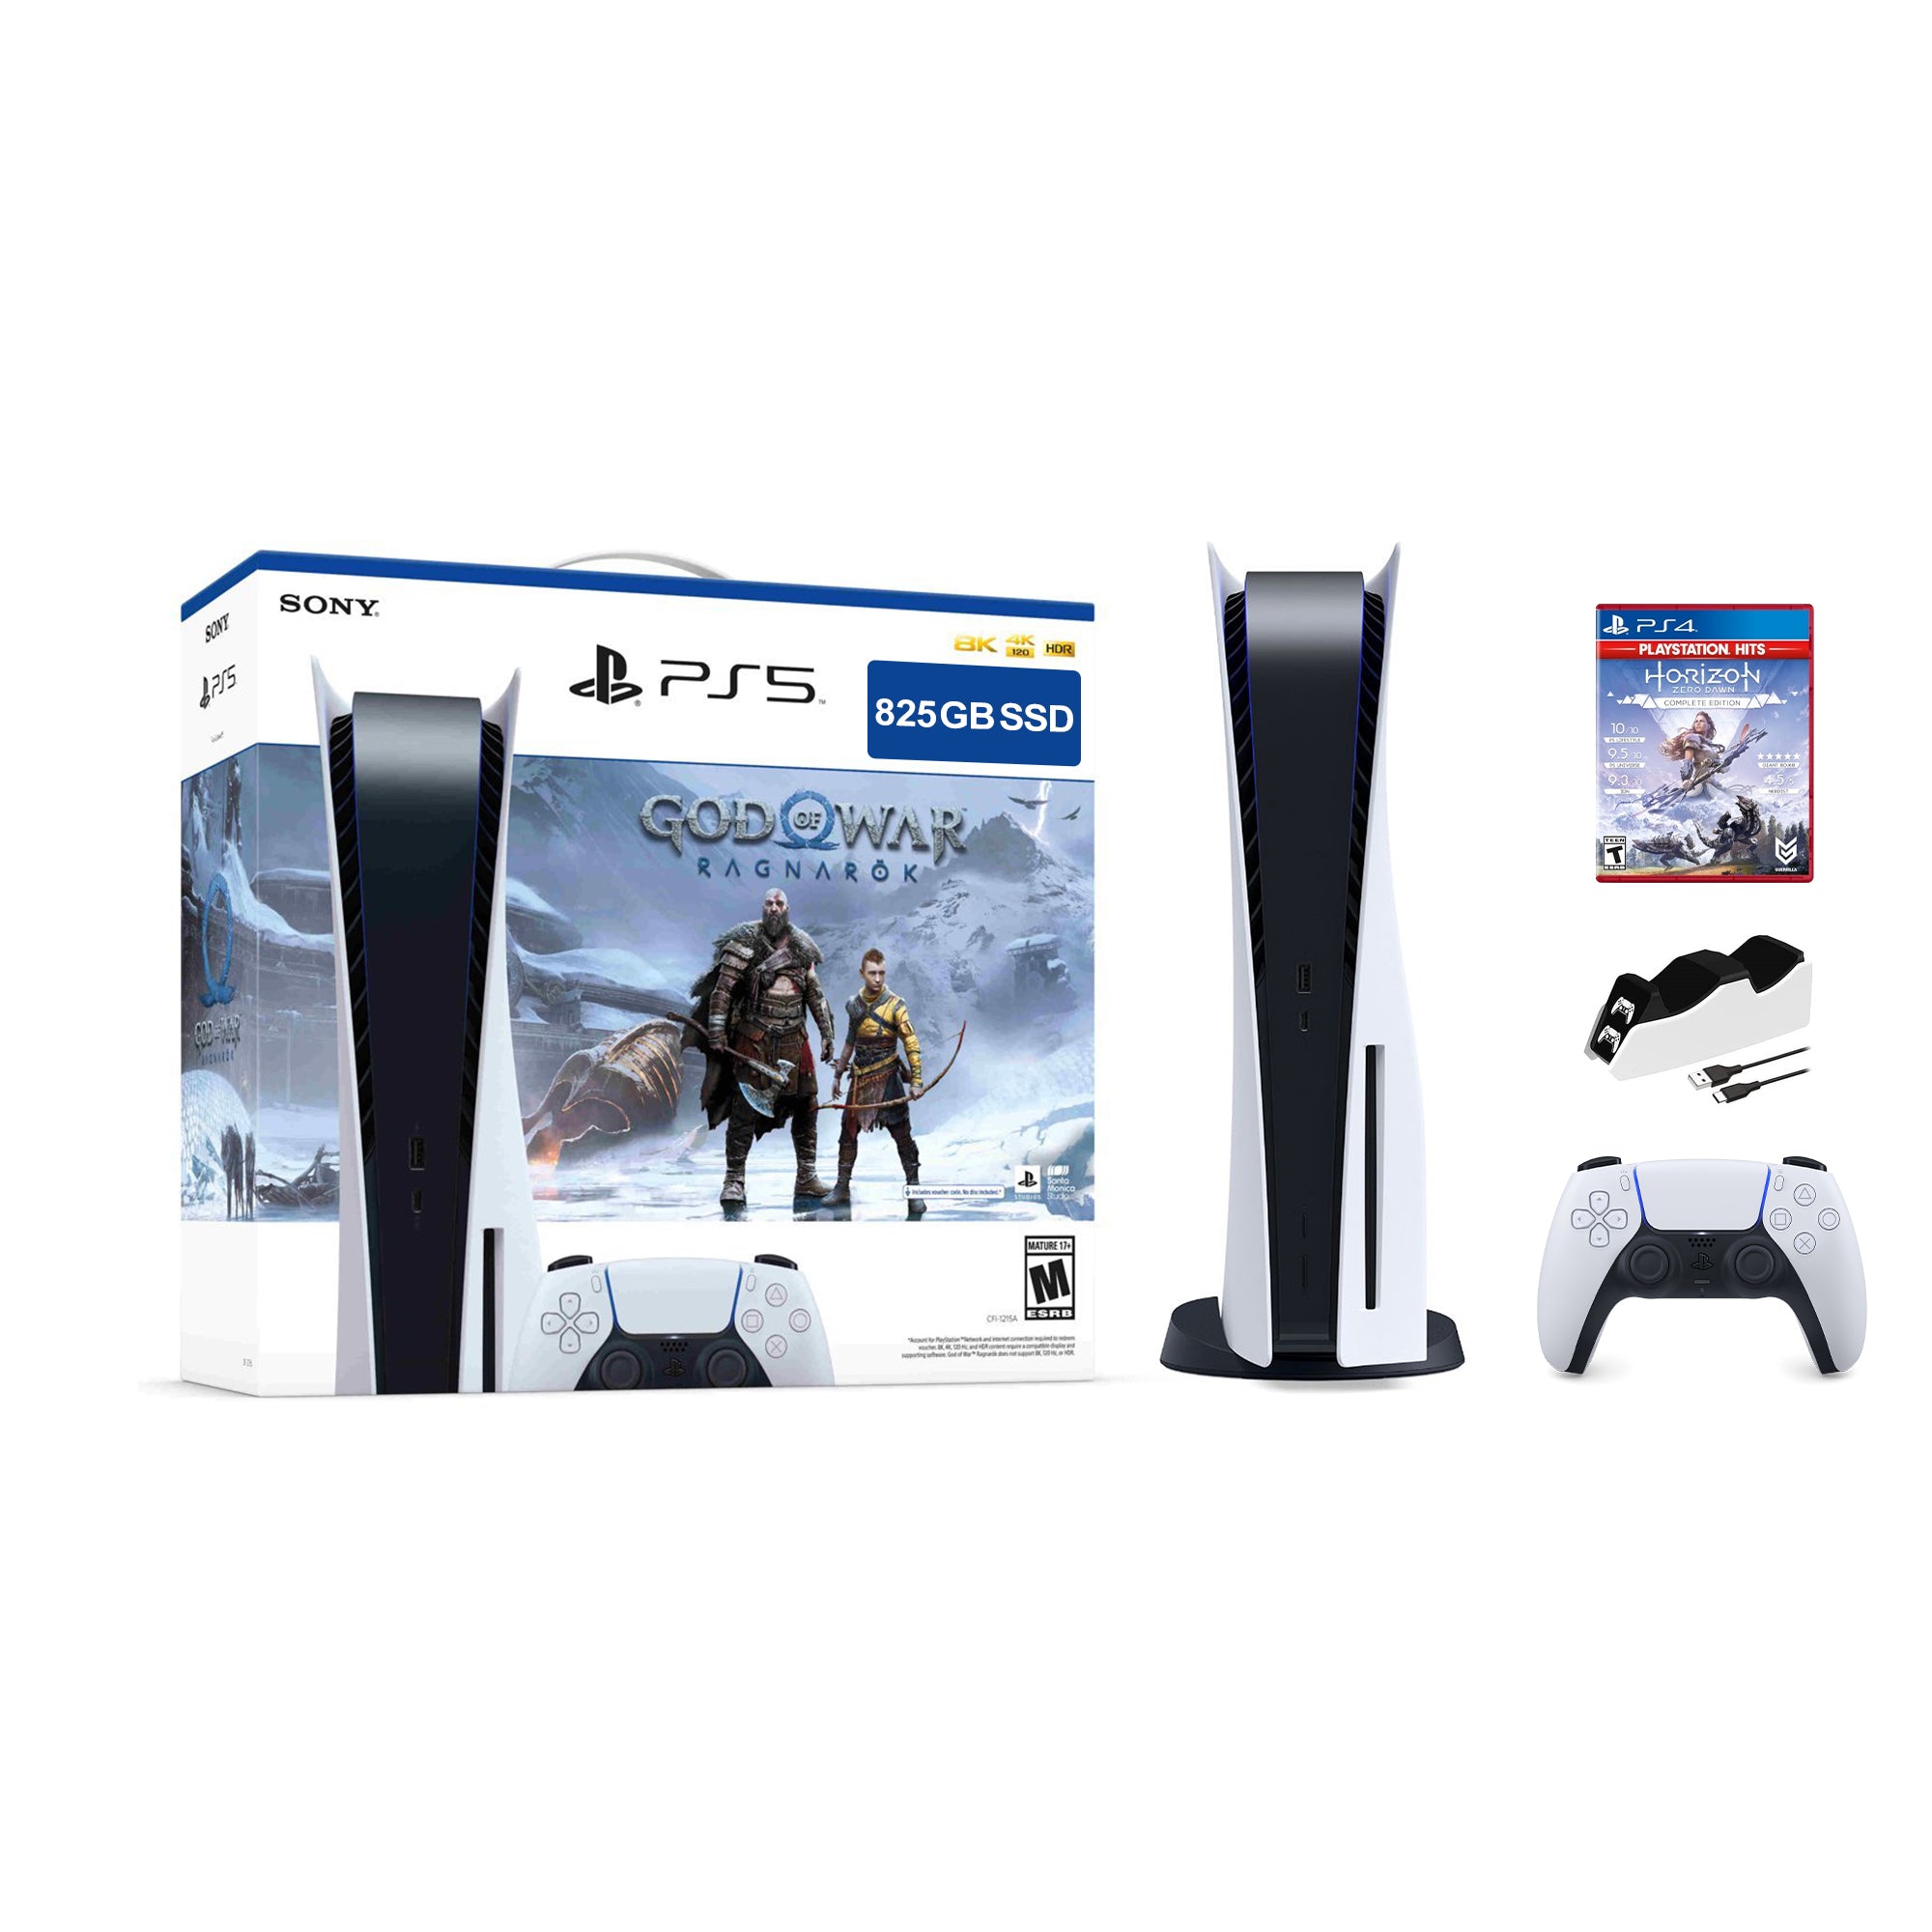 PlayStation 5 Disc Edition God of War Ragnarok Bundle with Horizon Zero Dawn and Mytrix Controller Charger